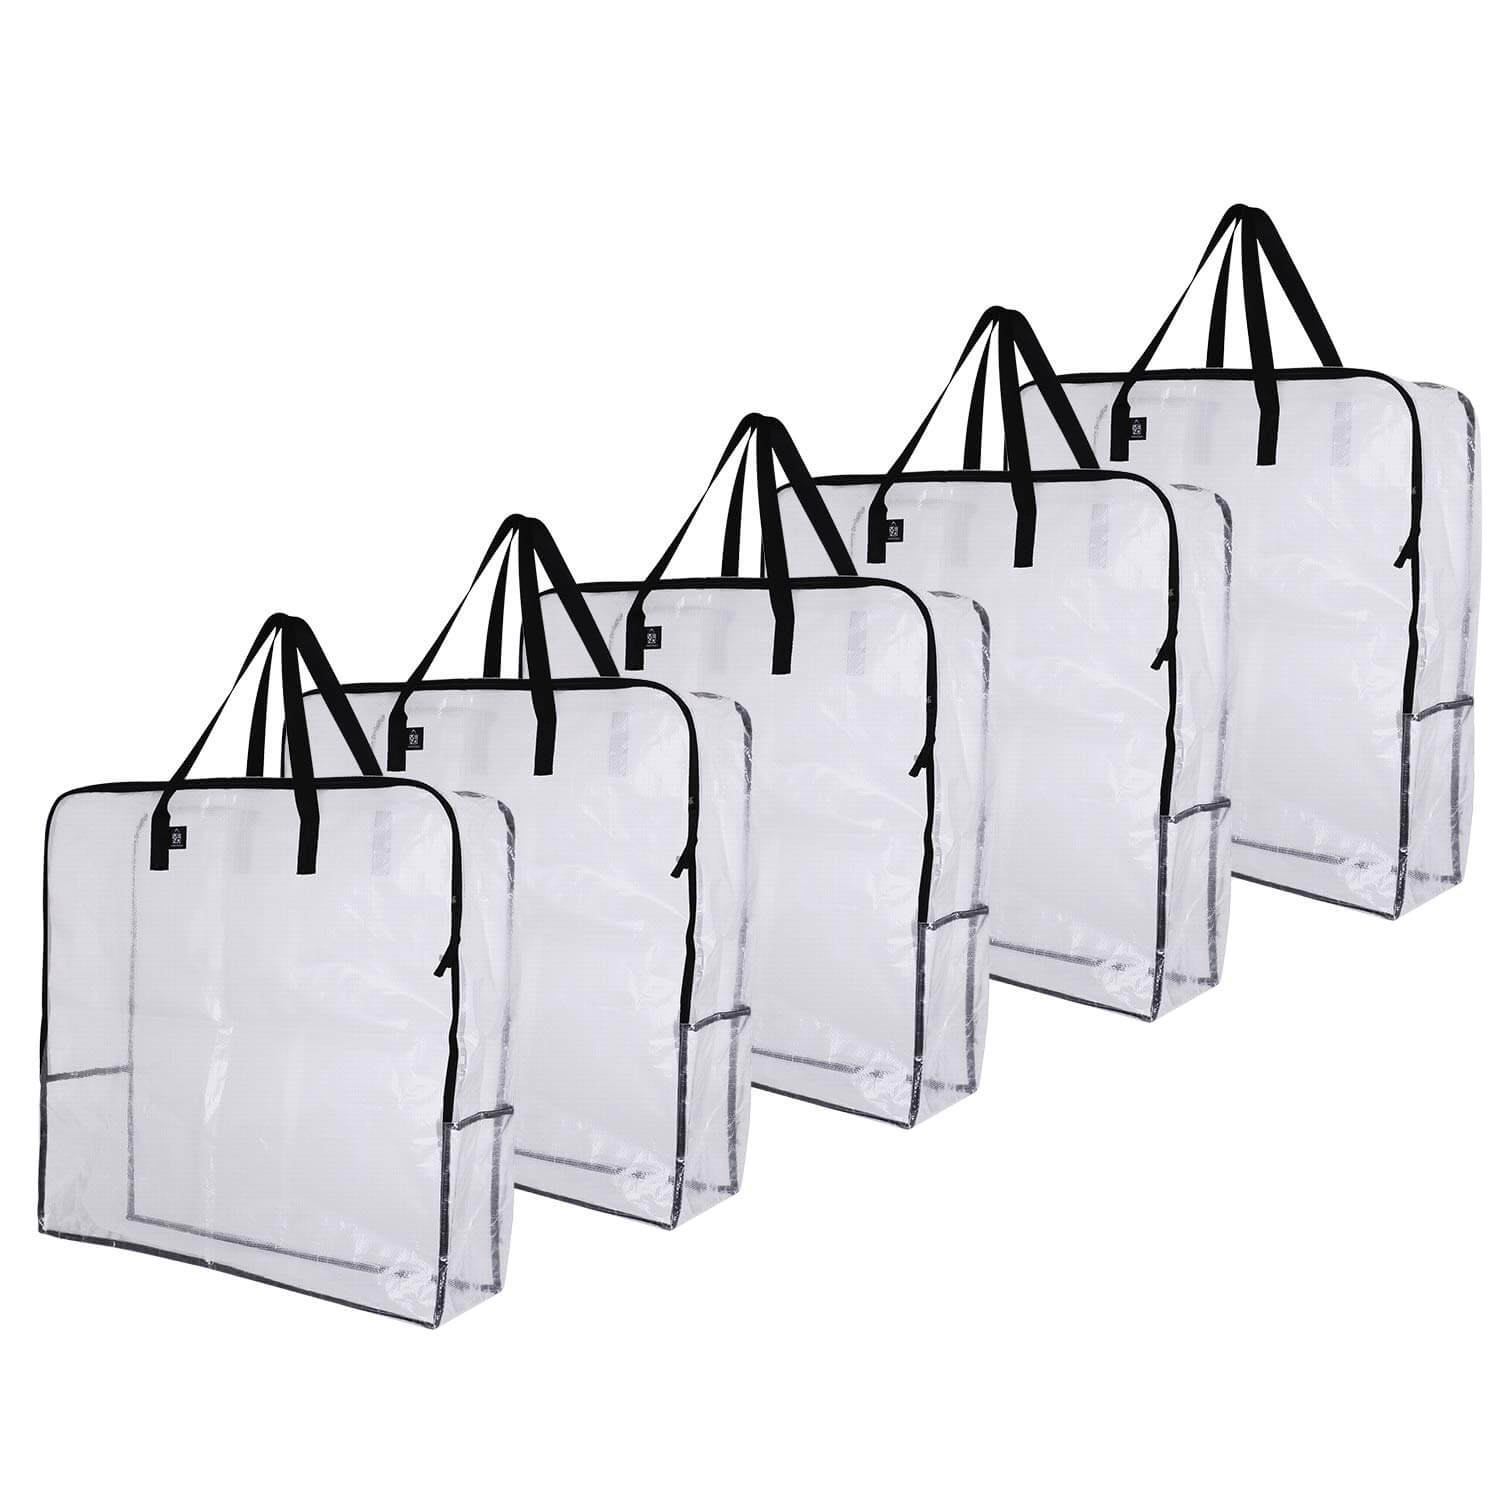 100 Bags 26×32 White Poly Mailer Large Plastic Shipping Bag 2MIL #10 26